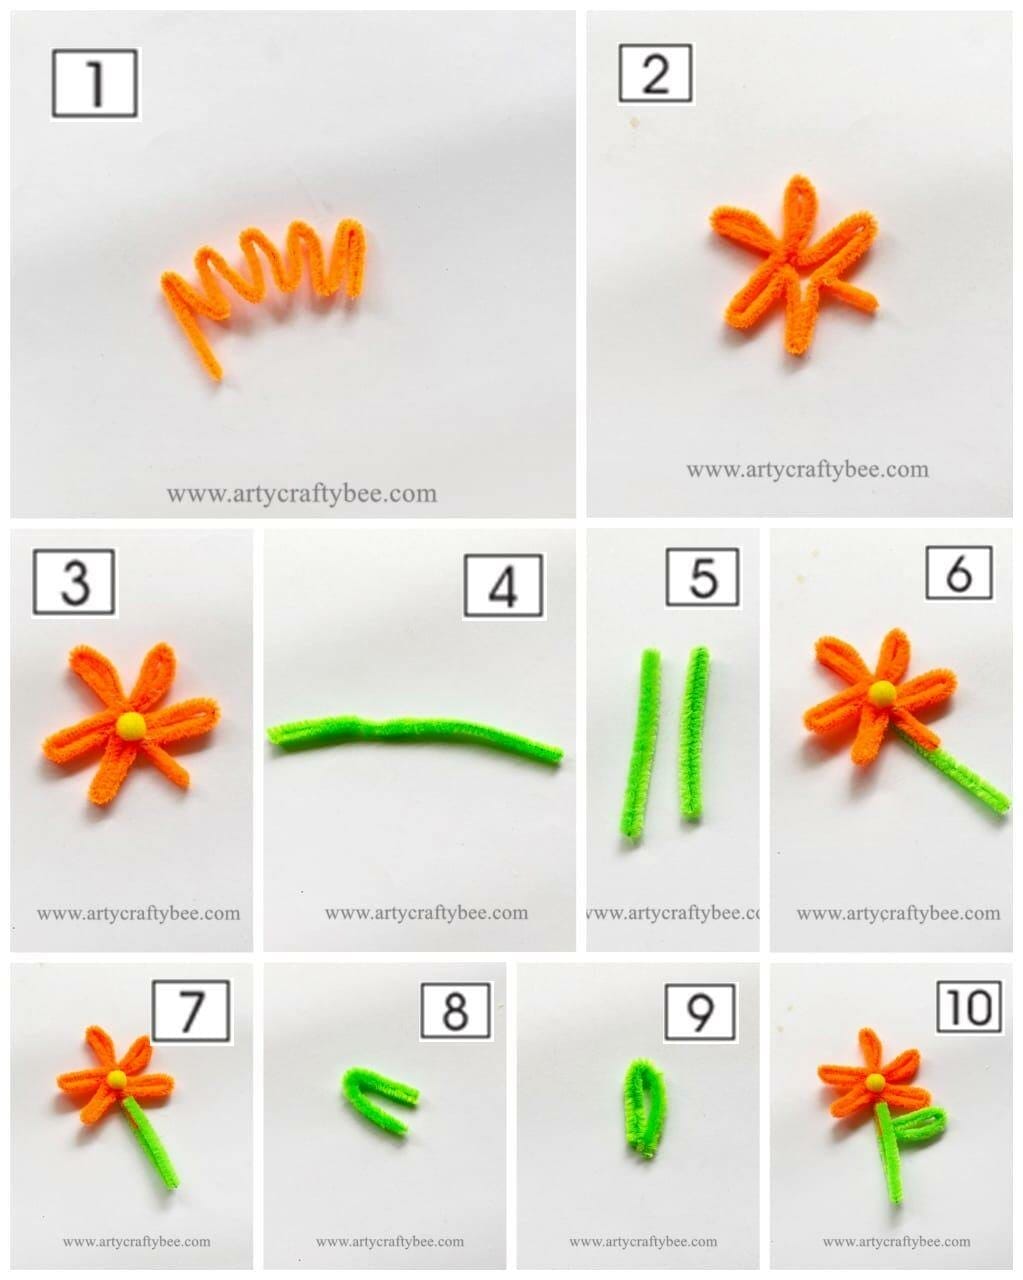 How To Make Pipe Cleaner Flower Bookmark Ste By Step Instructions